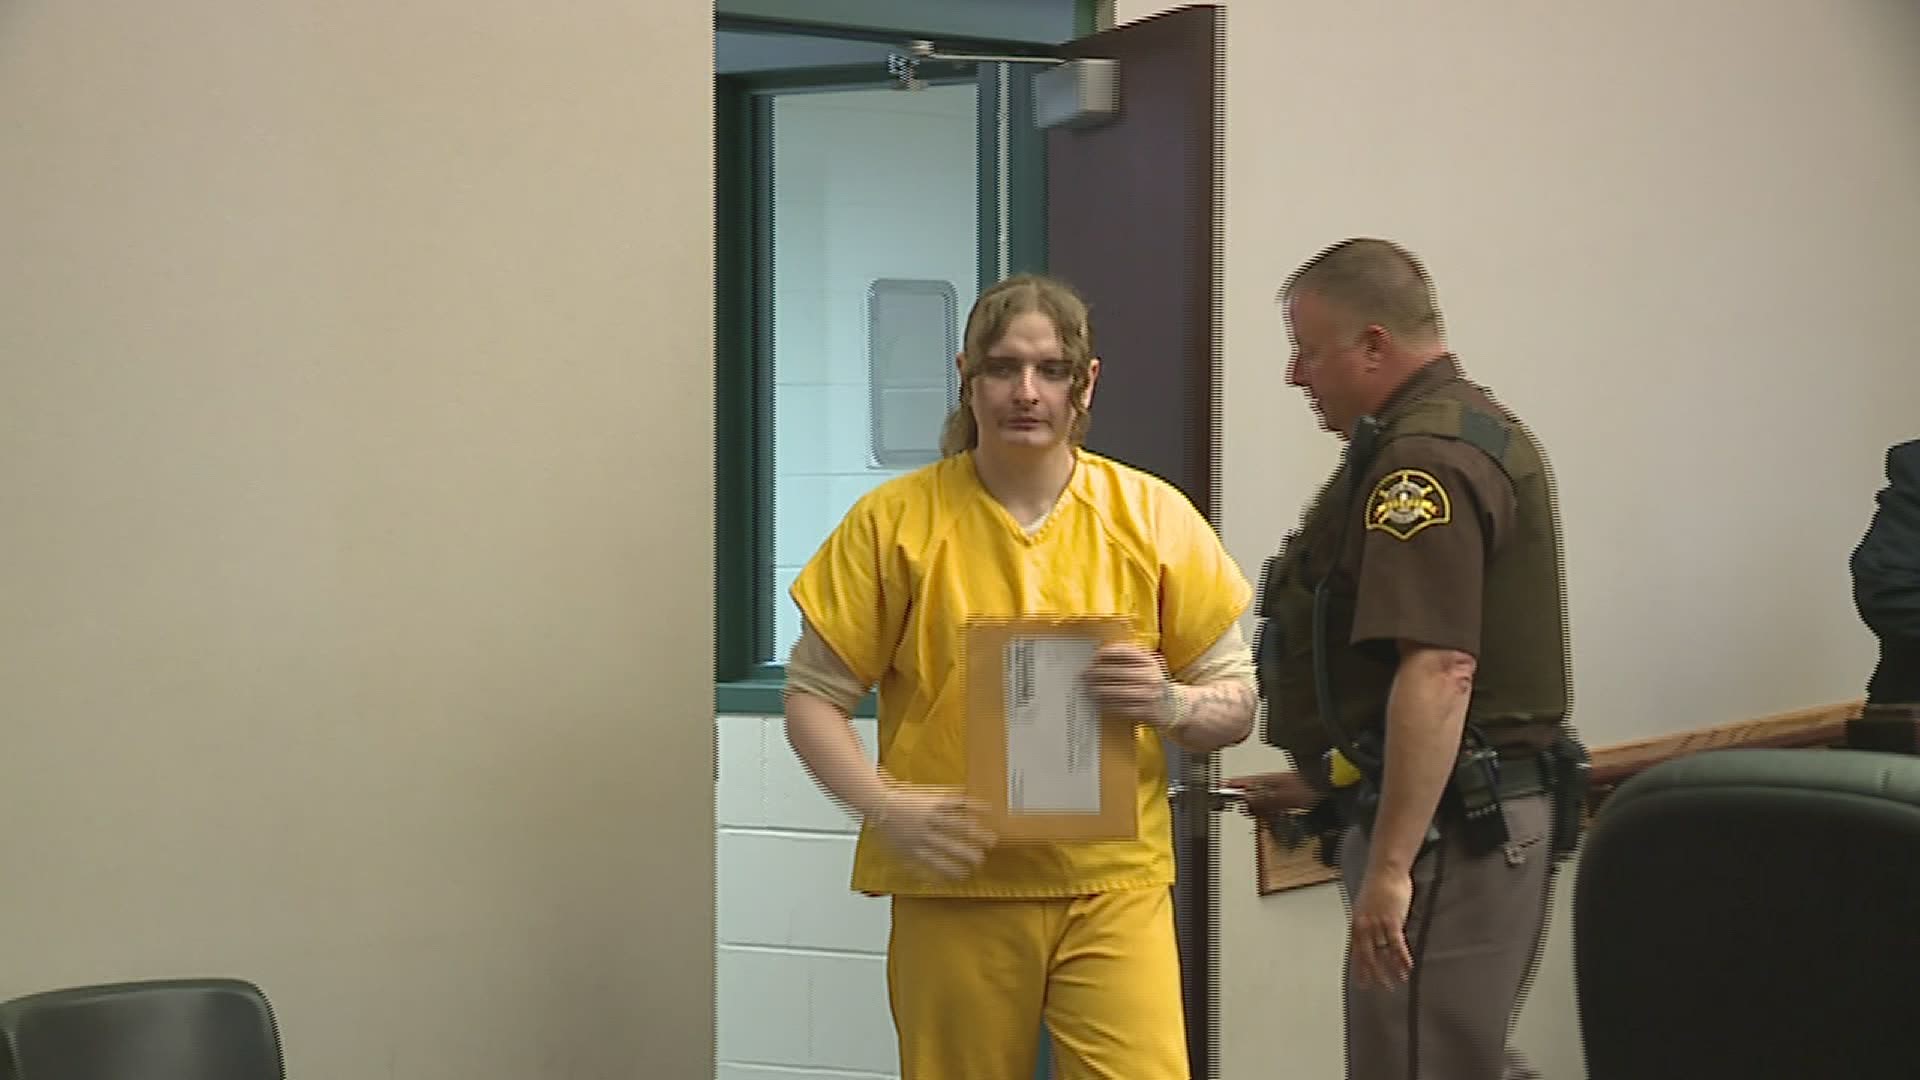 WQAD's David Bohlman shares a preview of how we got to this moment where Cory Gregory will get a new sentence for his role in the death of Adrianne Reynolds.